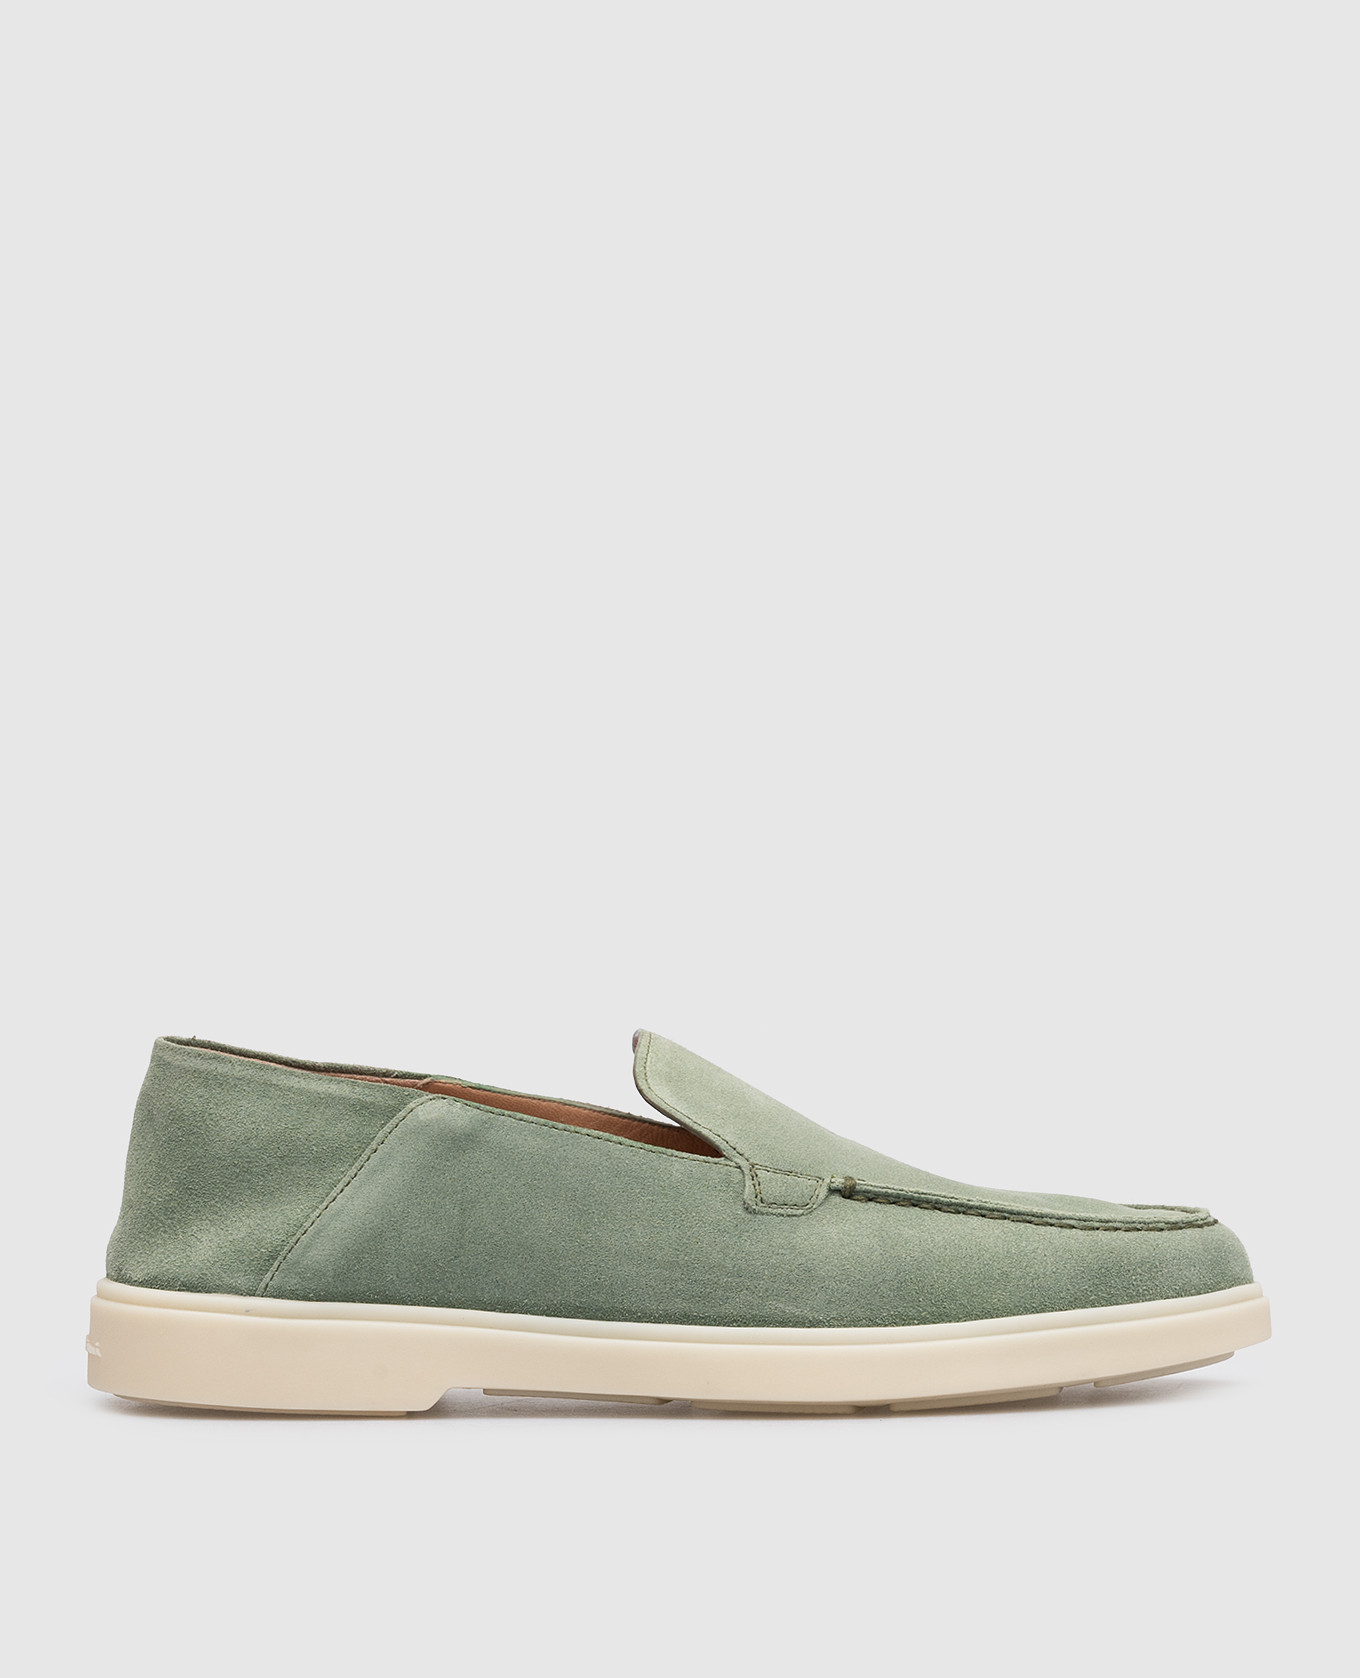 Green suede slippers